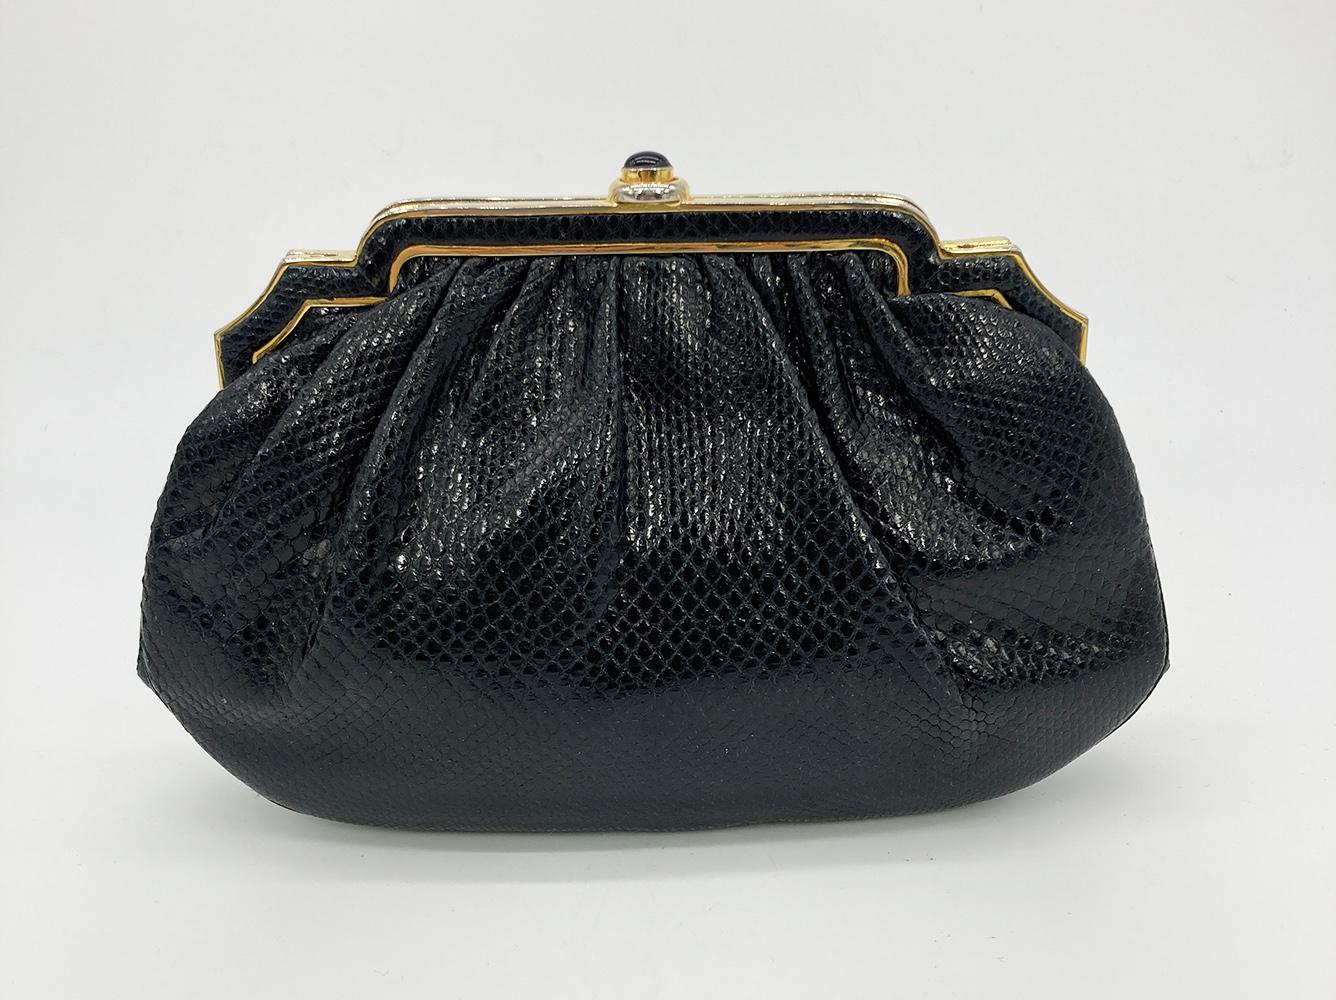 Judith Leiber Black Lizard Gold Deco Top Edge Clutch In Good Condition For Sale In Philadelphia, PA